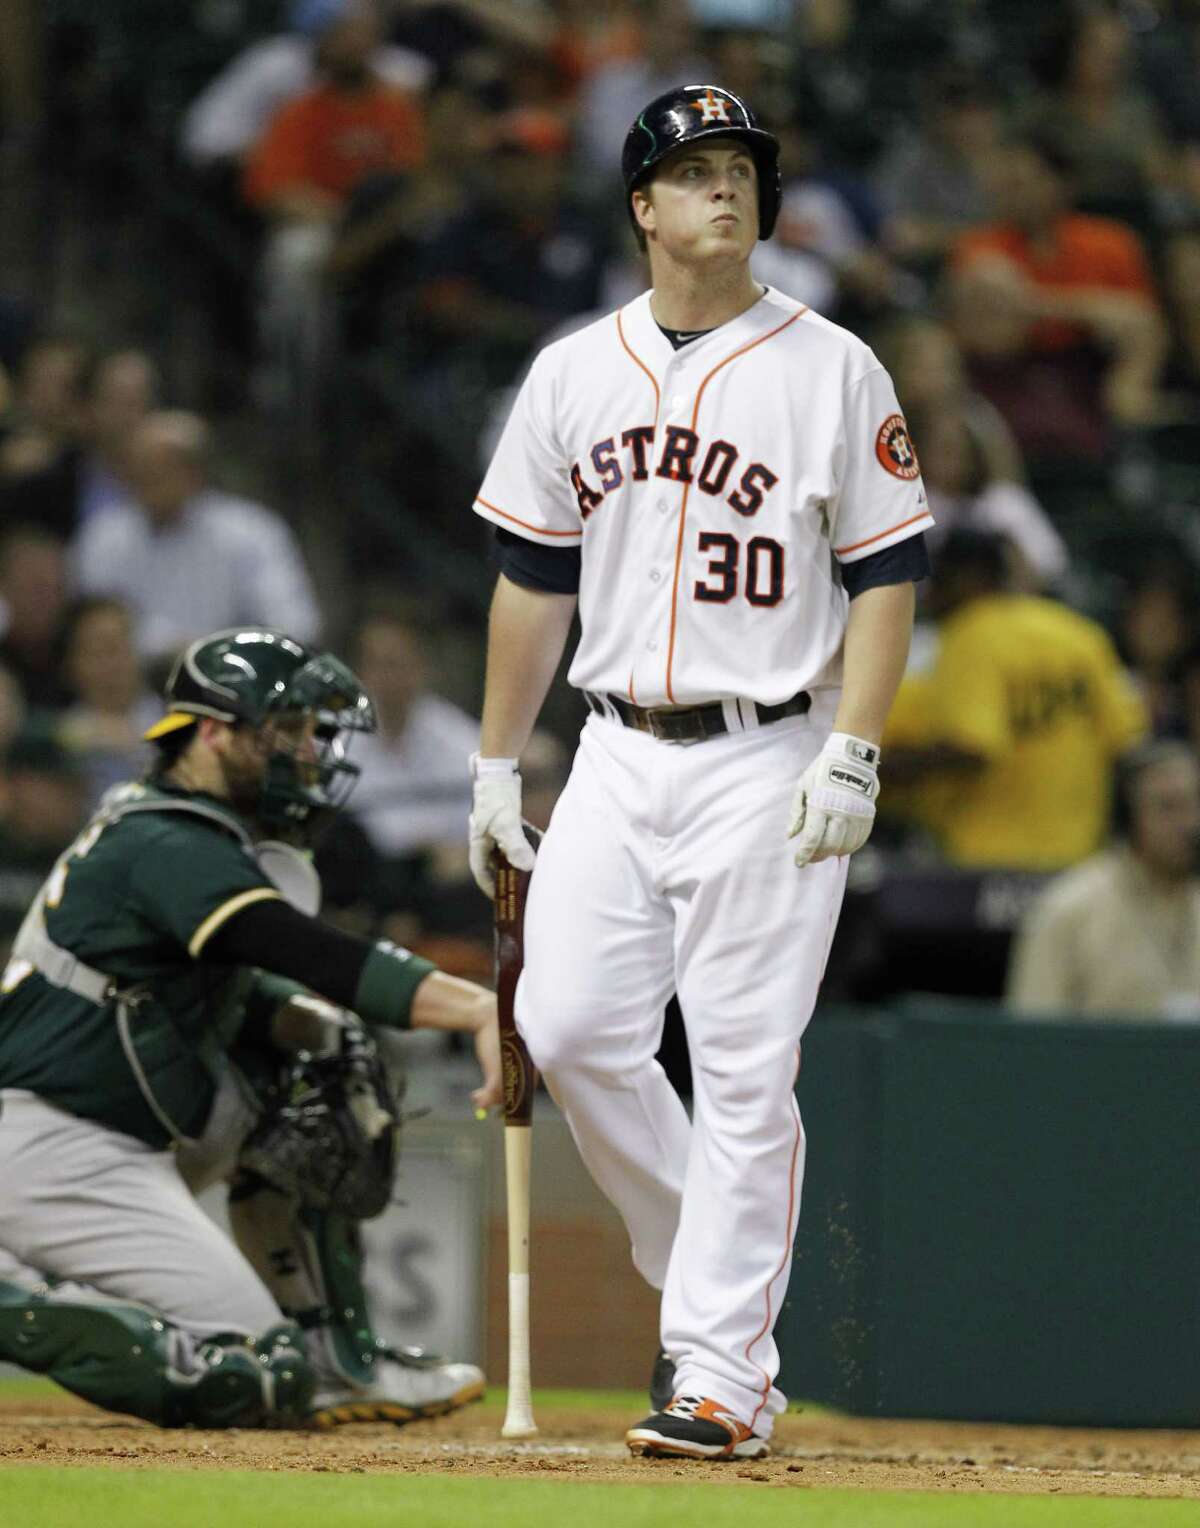 HOUSTON, TX - AUGUST 27: Matt Dominguez #30 of the Houston Astros walks from the plate after striking out in the fourth inning against the Oakland Athletics at Minute Maid Park on August 27, 2014 in Houston, Texas. (Photo by Bob Levey/Getty Images)